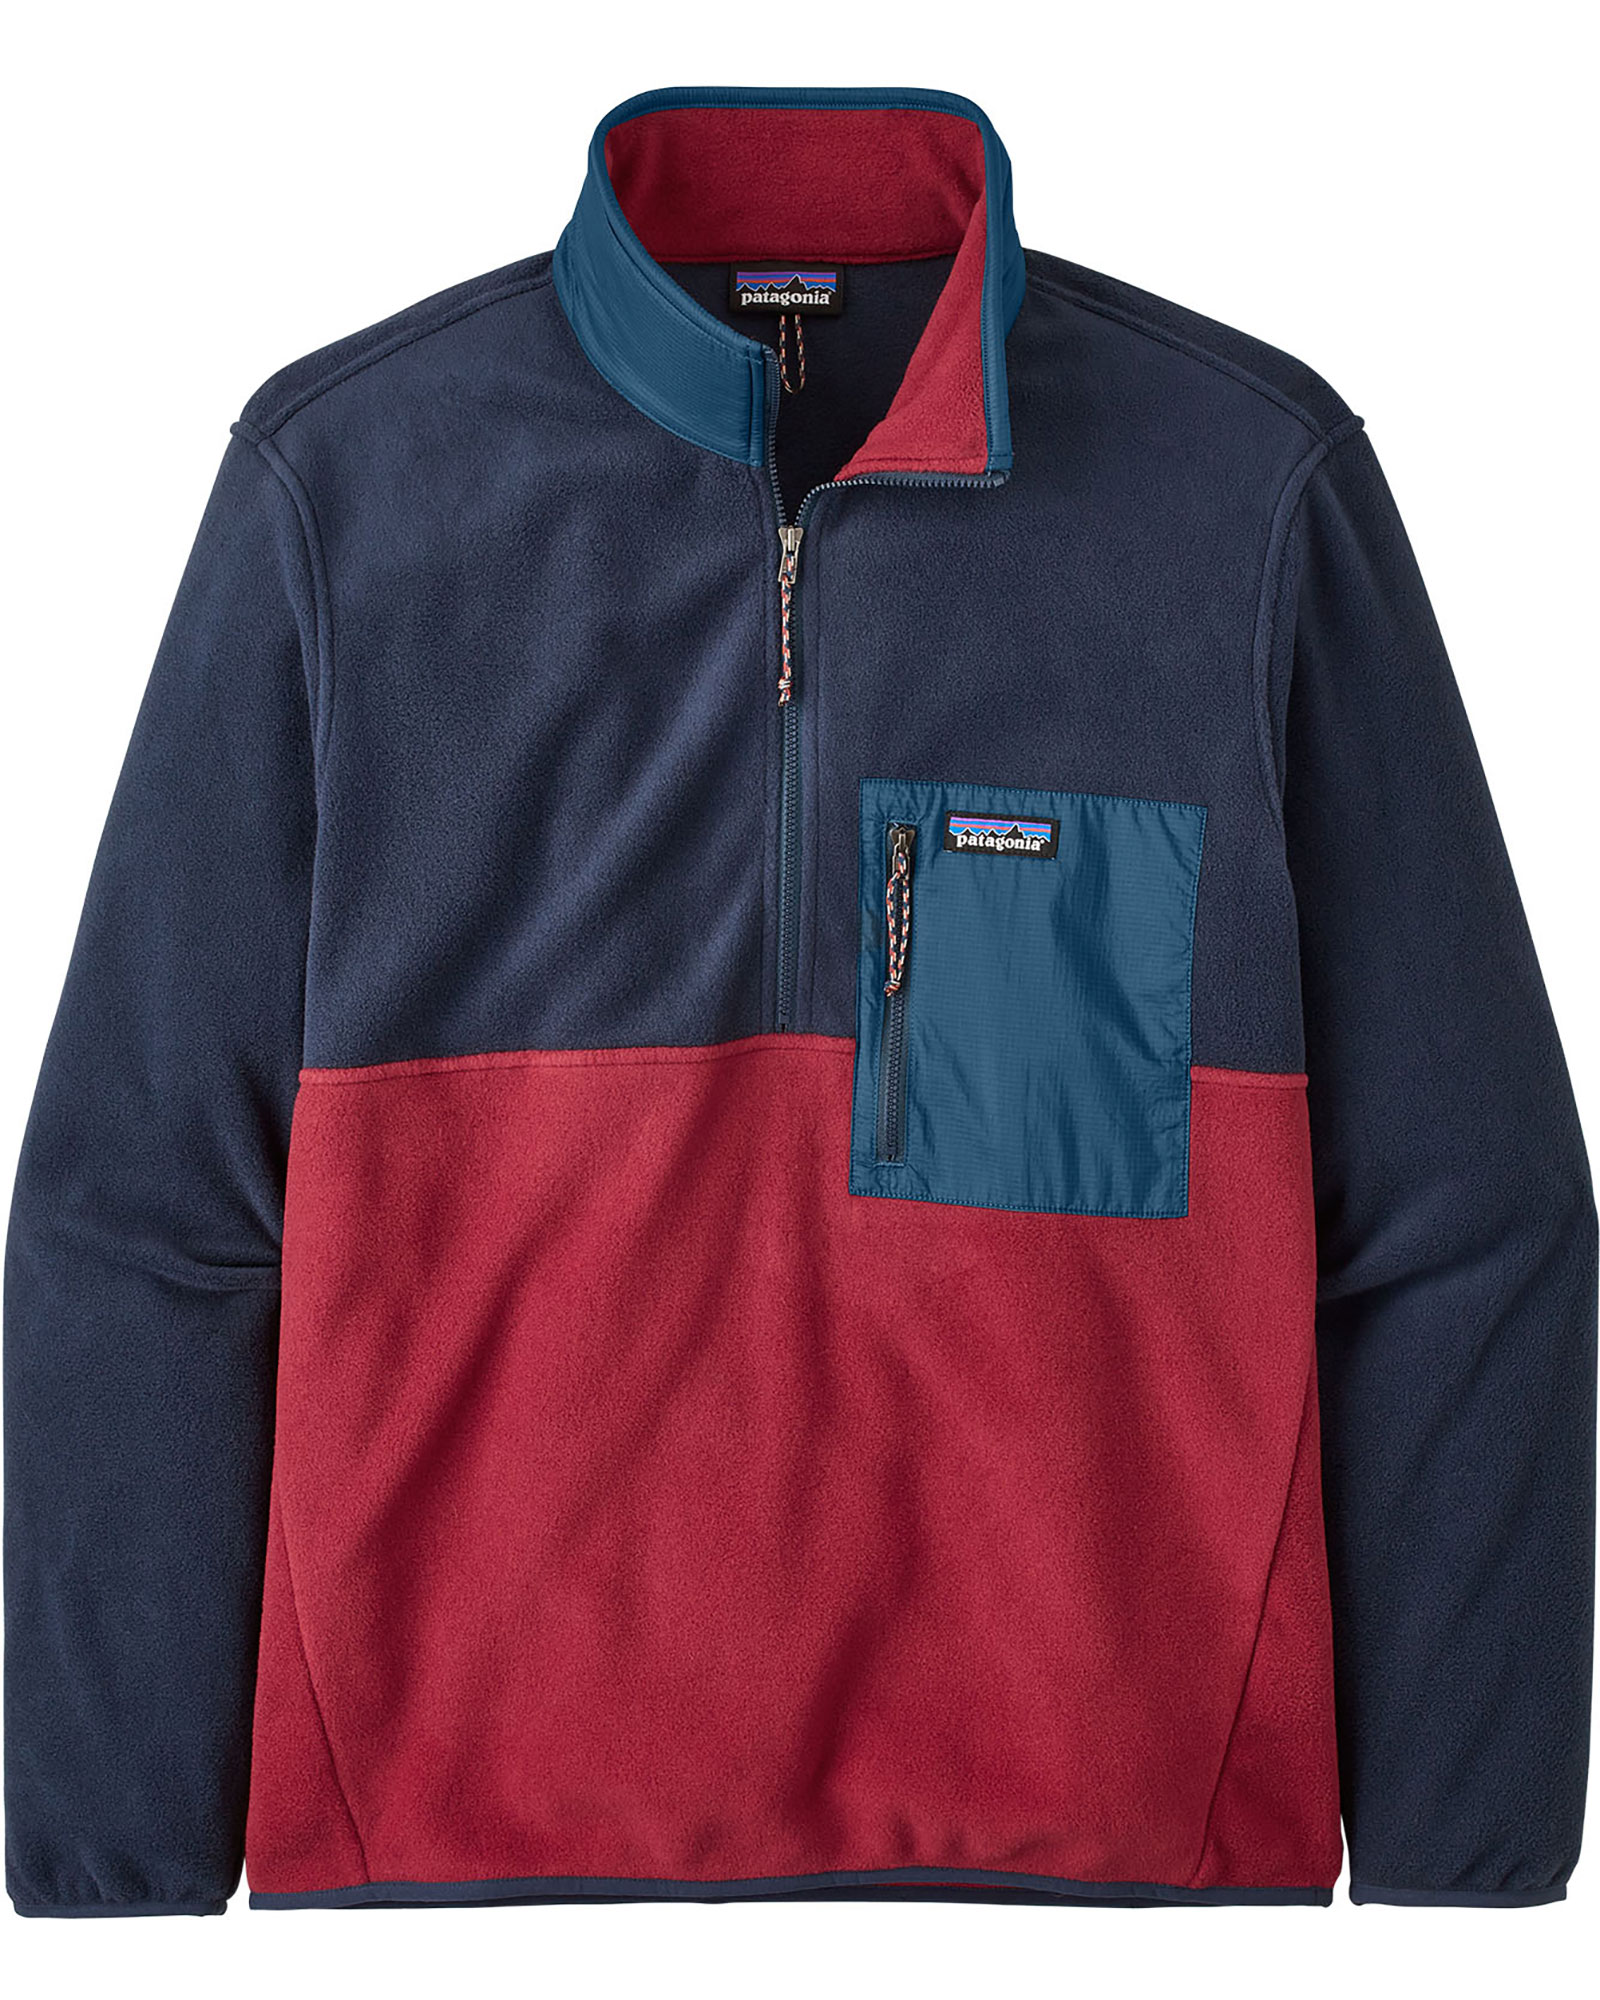 Patagonia Microdini Men’s 1/2 Zip Pullover - Wax Red S